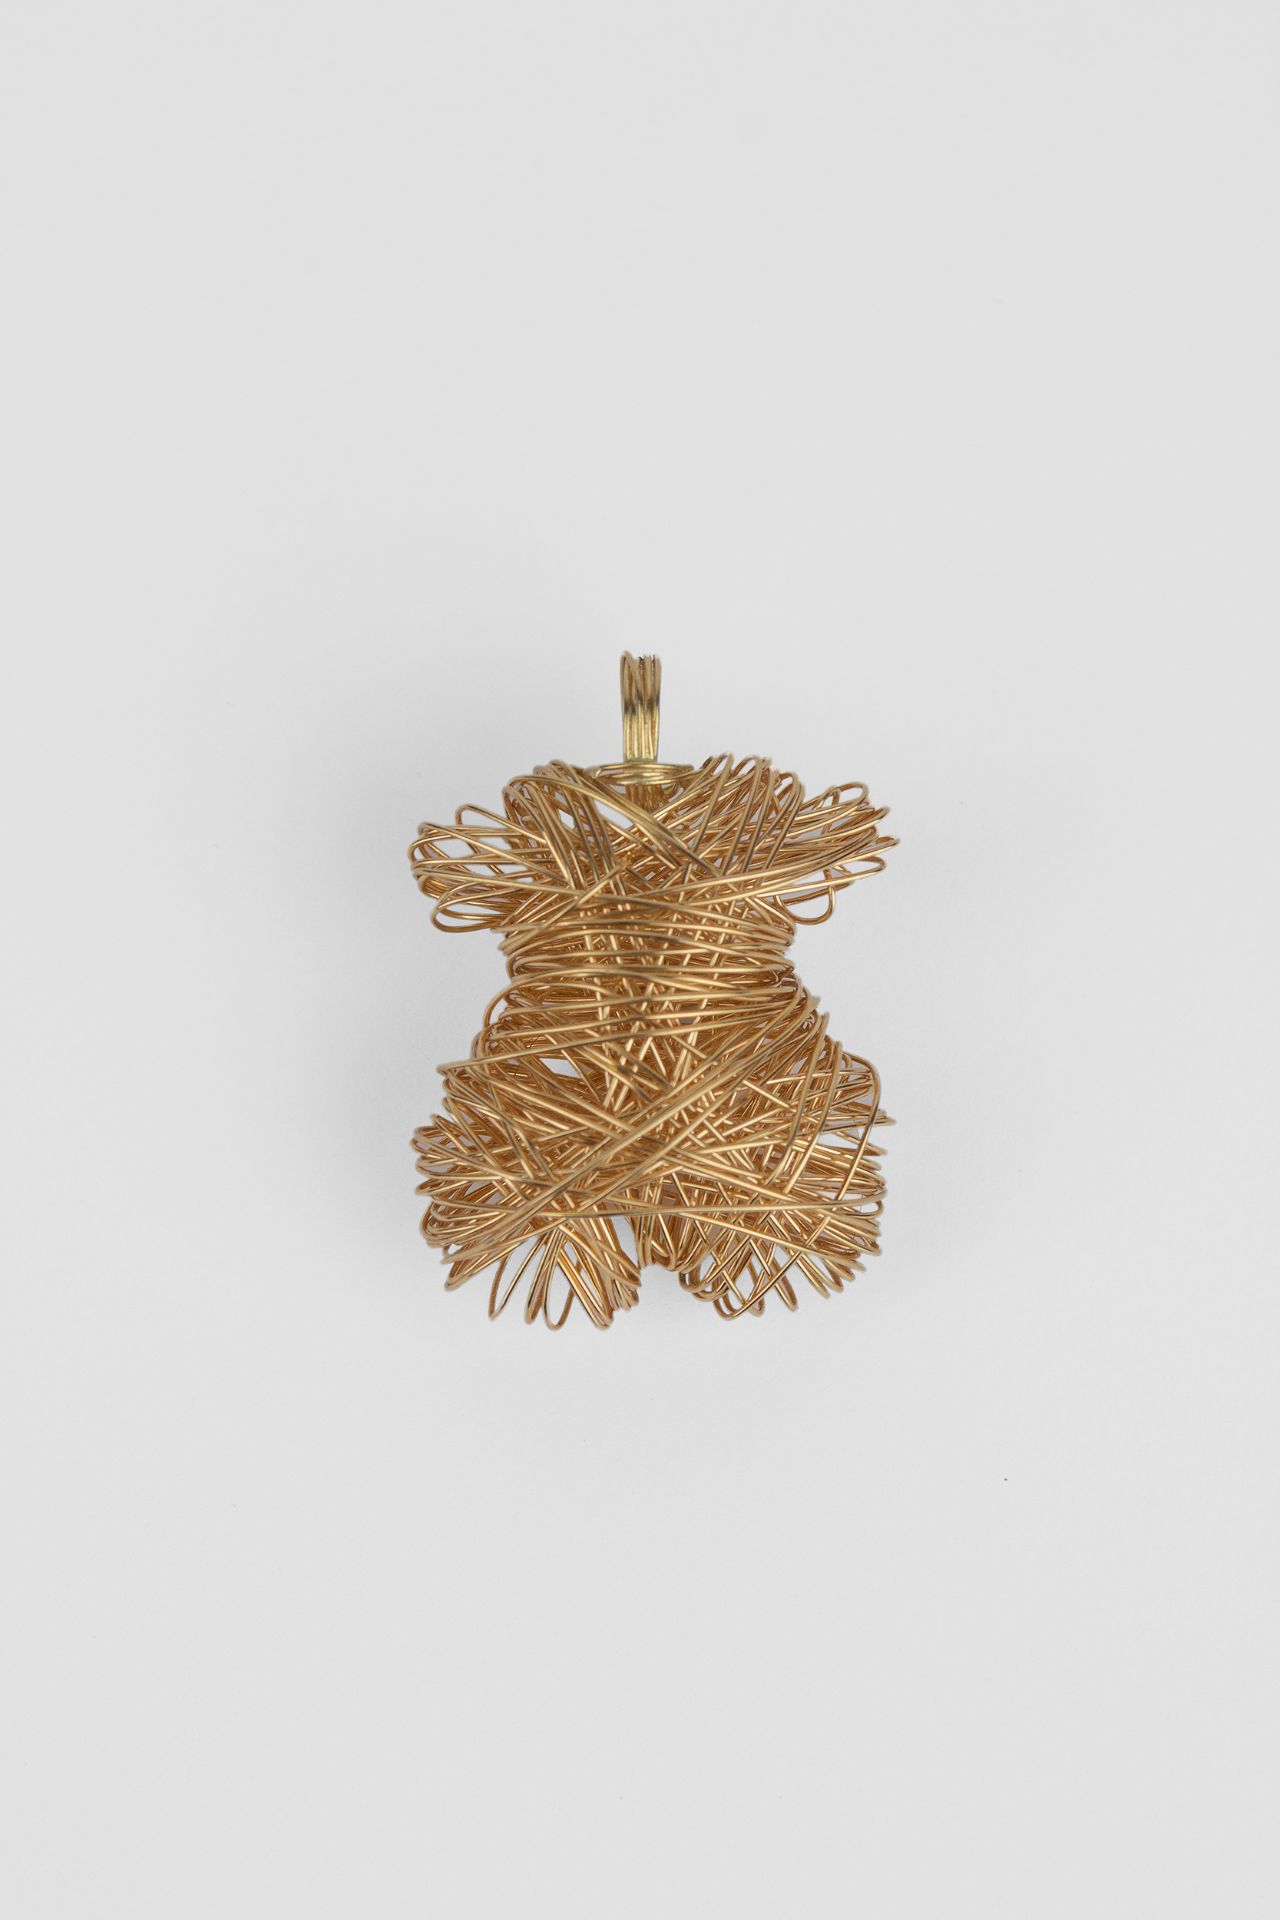 Tous. A limited edition 18k. yellow gold wire pendant